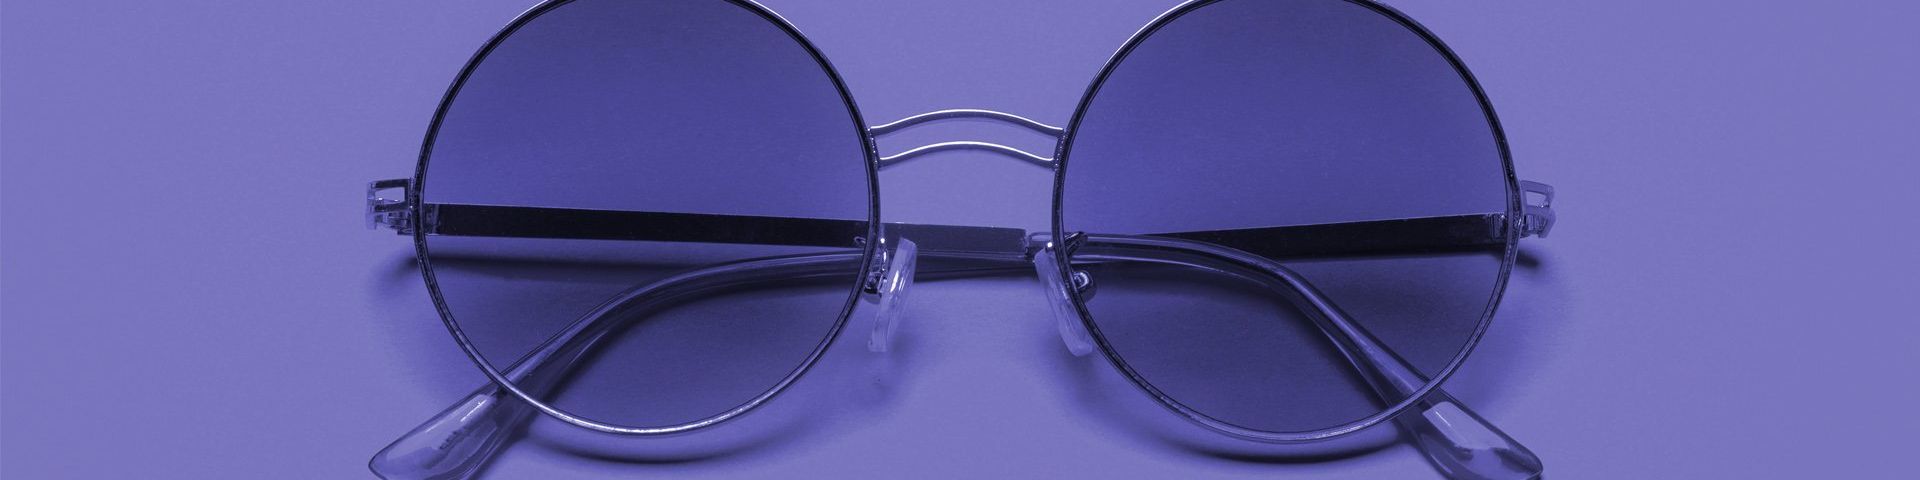 A pair of round ‘John Lennon’ style purple-tinted spectacles on a purple background.